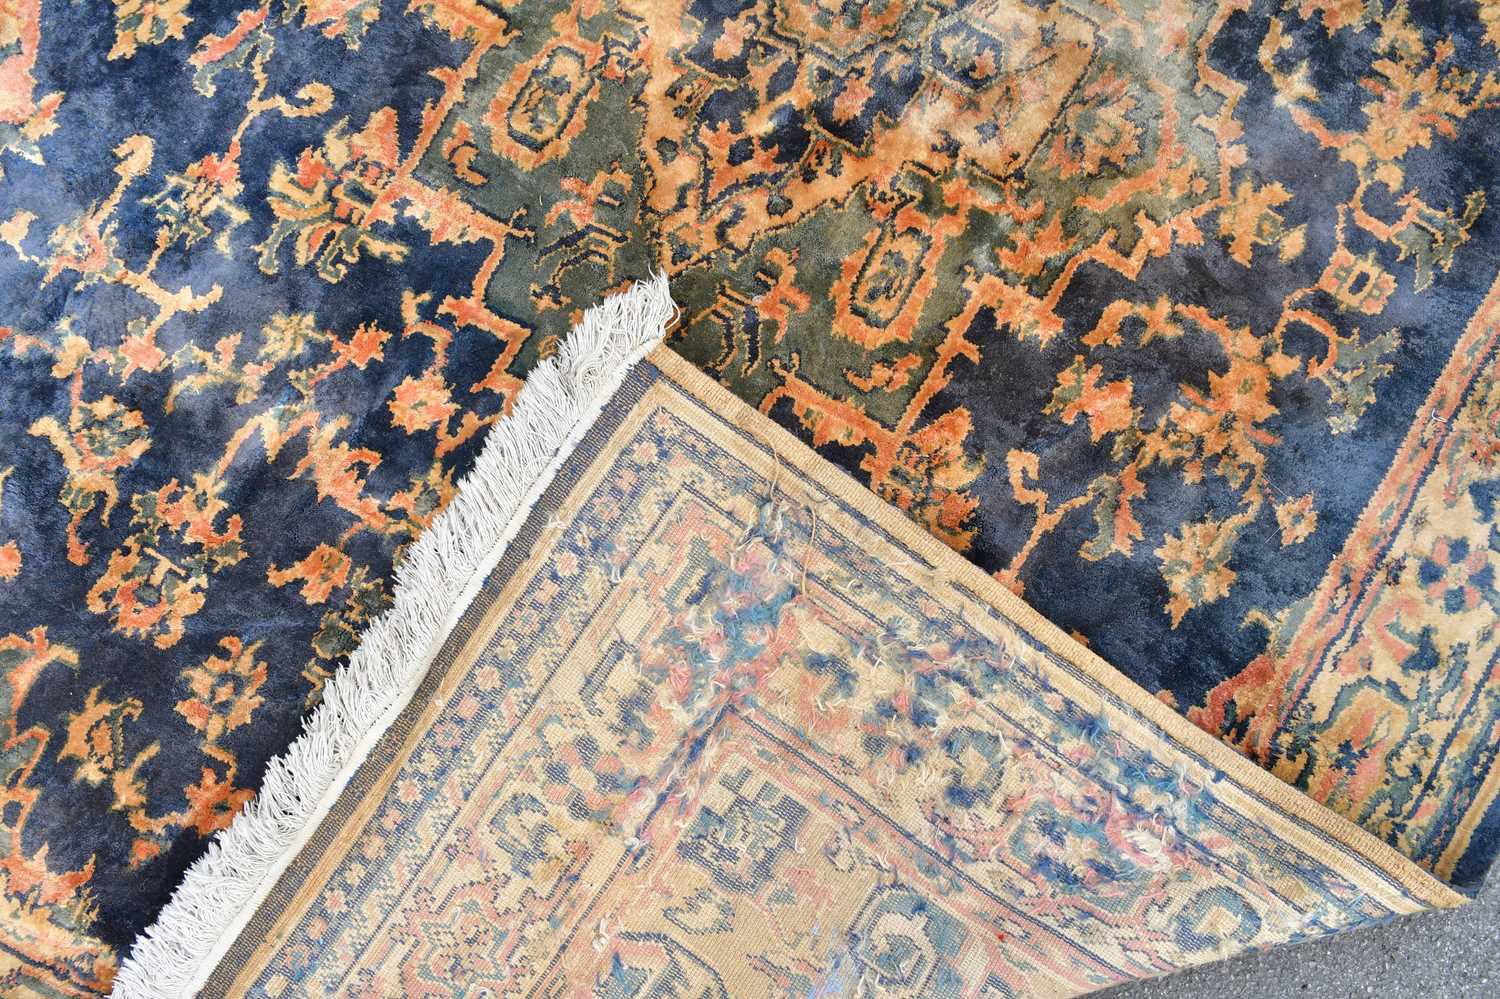 A decorative eastern style rug with floral decoration on blue and orange ground 270cm x 182cm. - Image 2 of 3